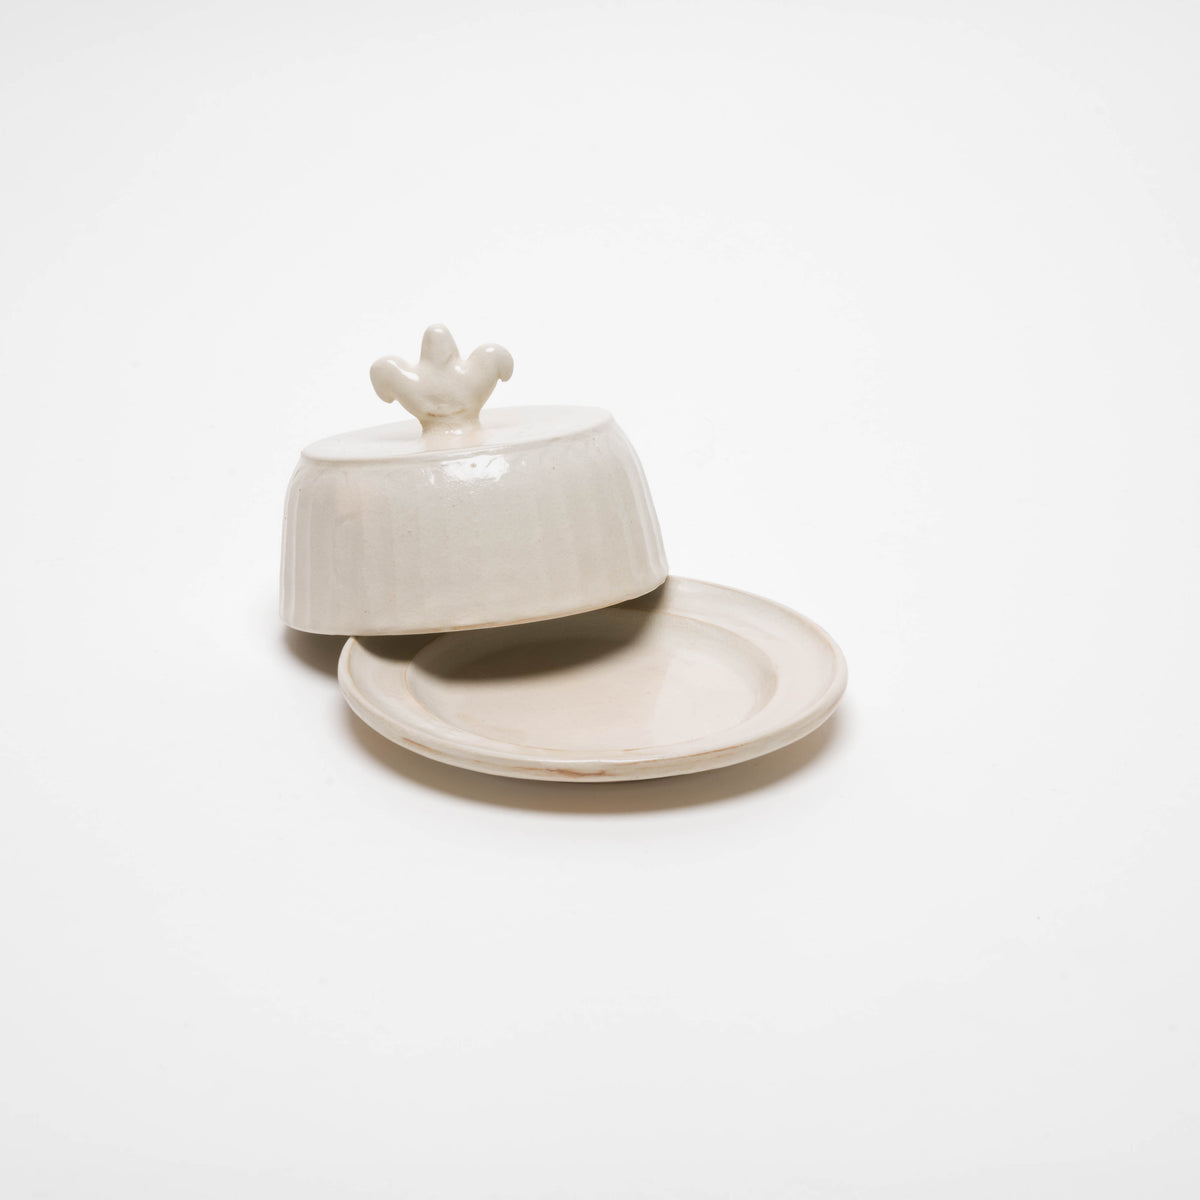 Butter dish round, small